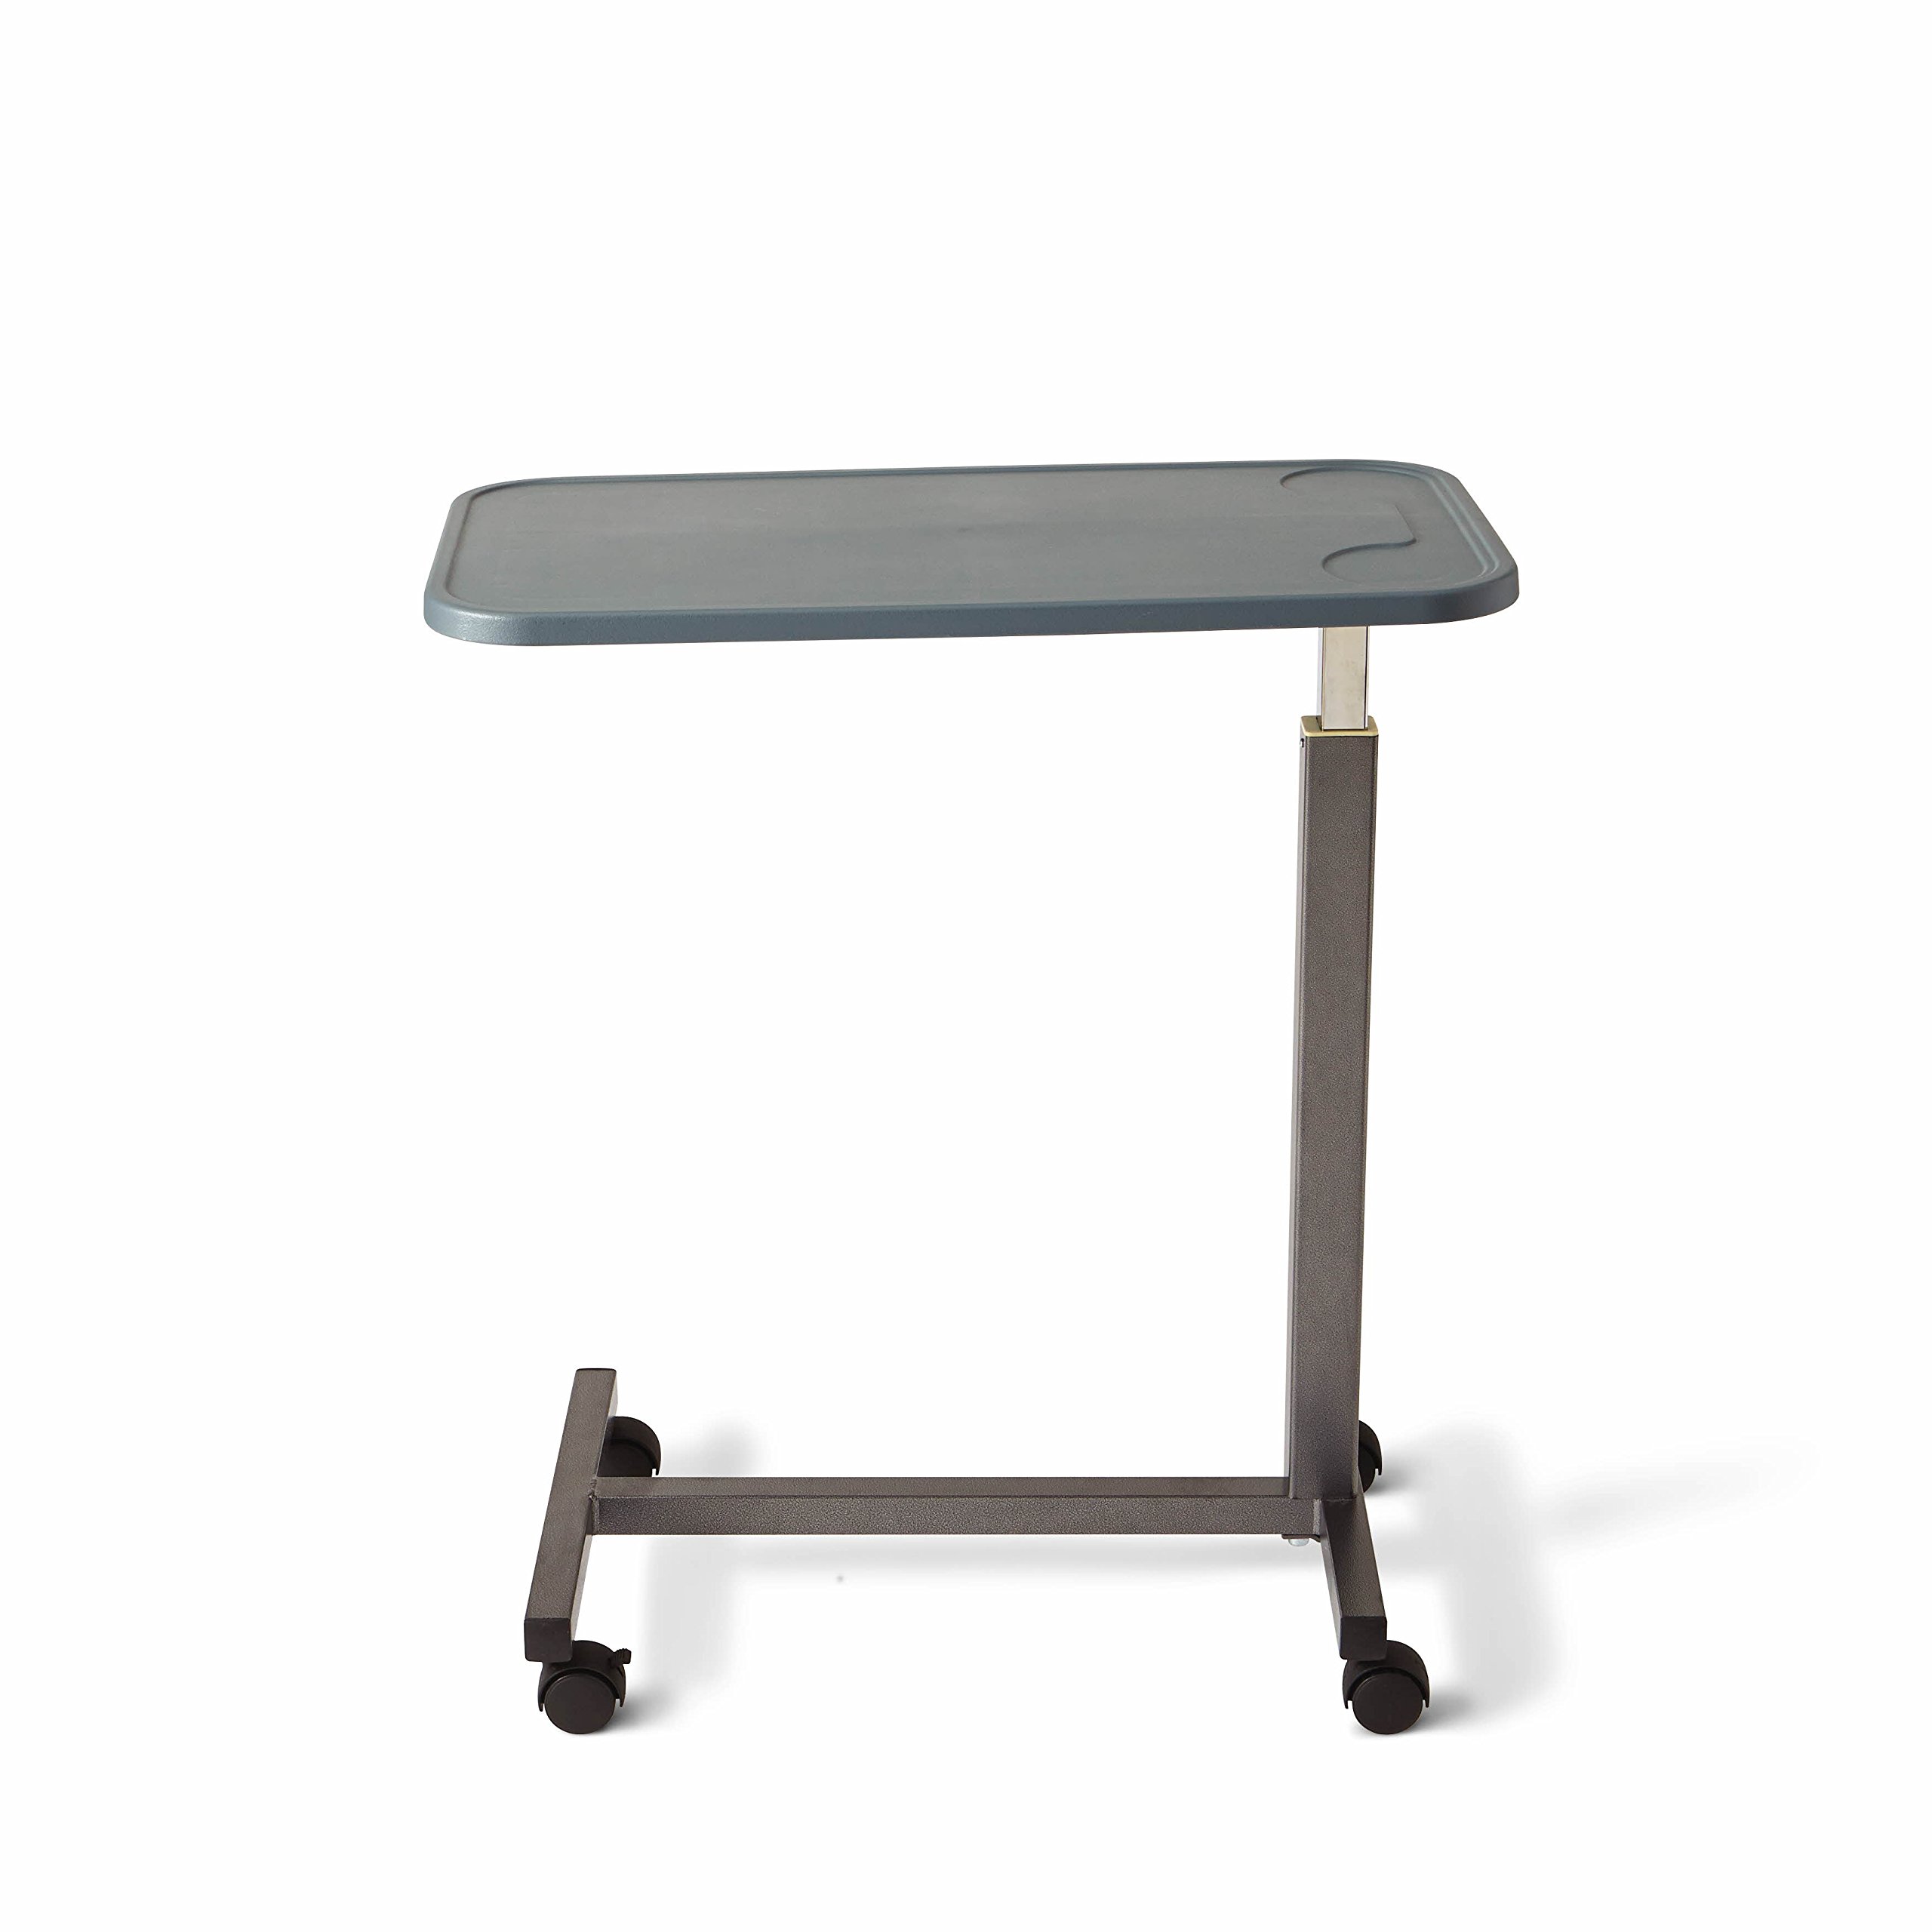 Medline Adjustable Overbed Bedside Table with Wheels, Great for Hospital Use or At Home as Bed Tray, Composite Table Top GREY 30X15